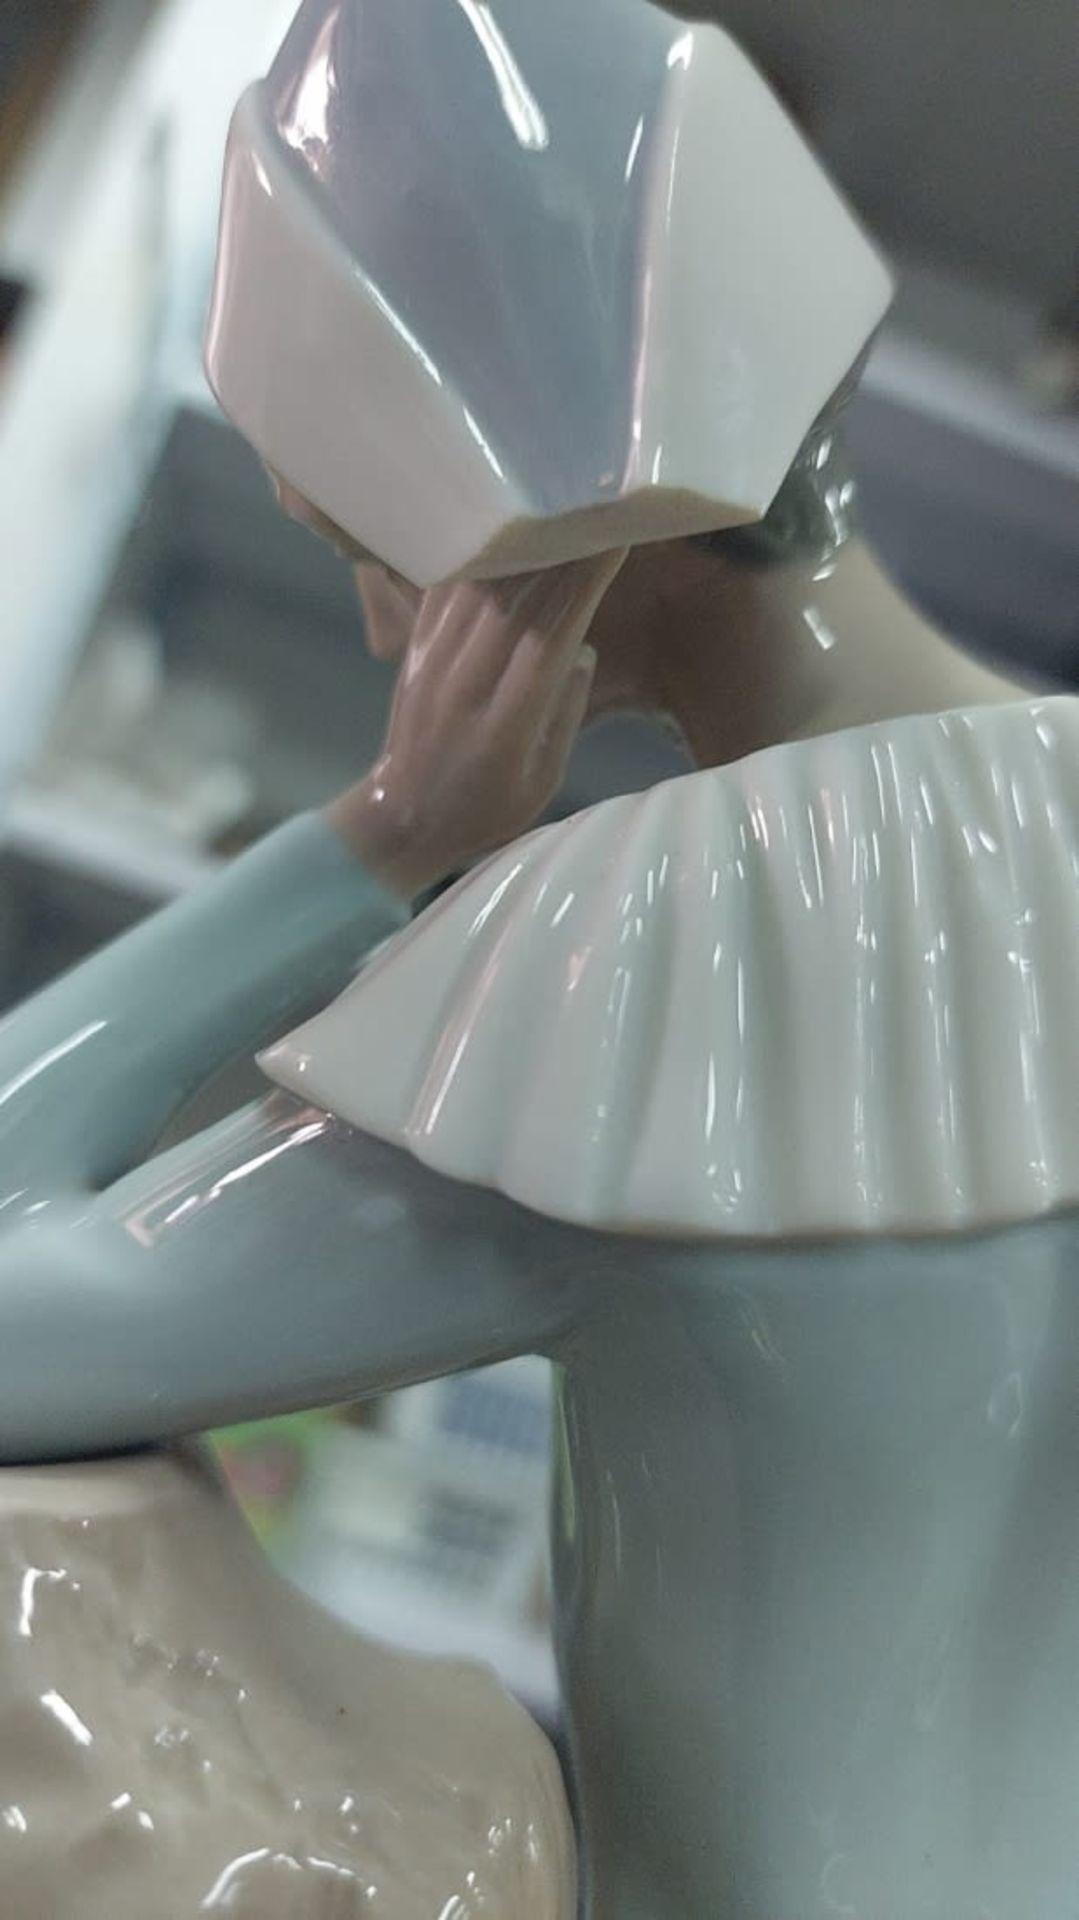 Spanish porcelain figurine made by: 'NAO' (from Lladro workshop), in the form of Harlequin, - Image 5 of 5